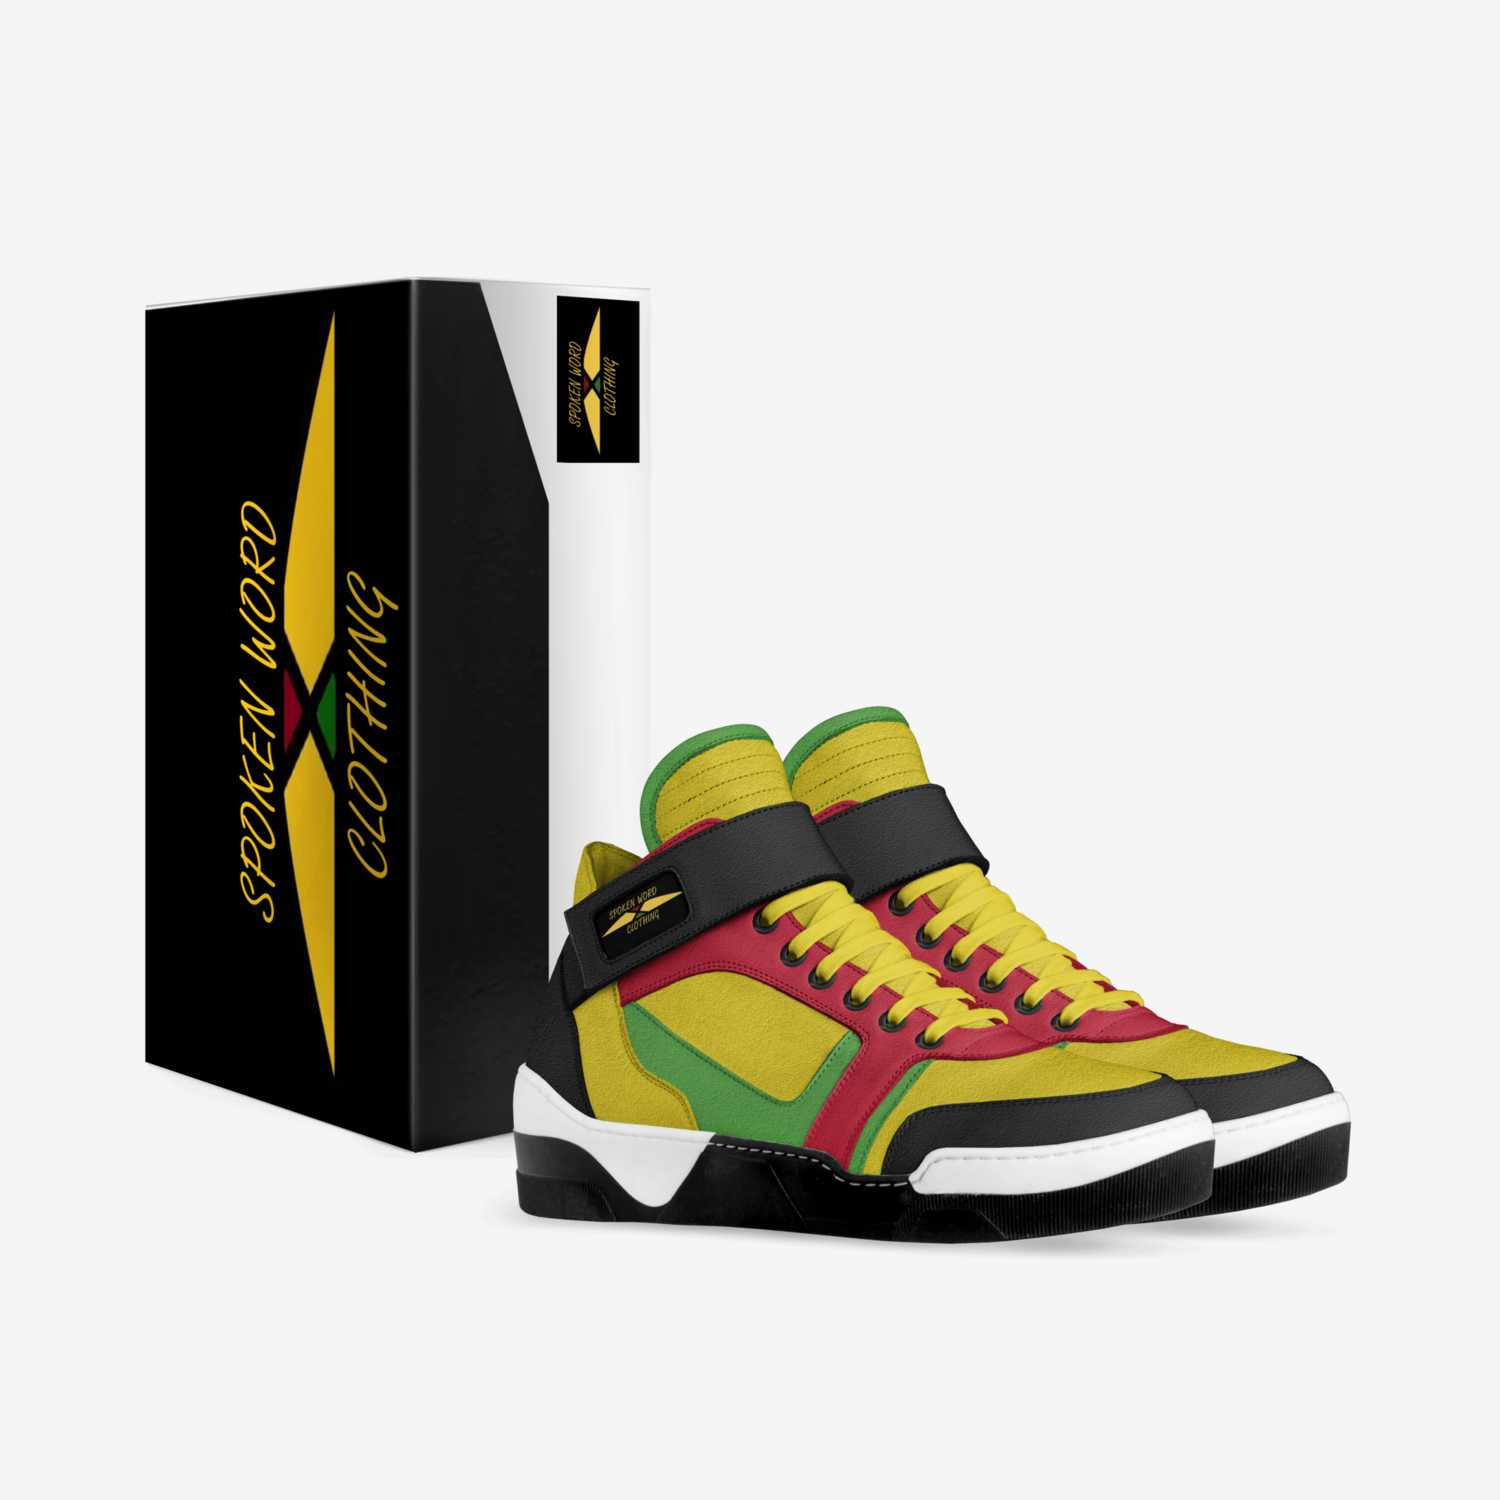 Spoken Word custom made in Italy shoes by Nicole Bowe | Box view